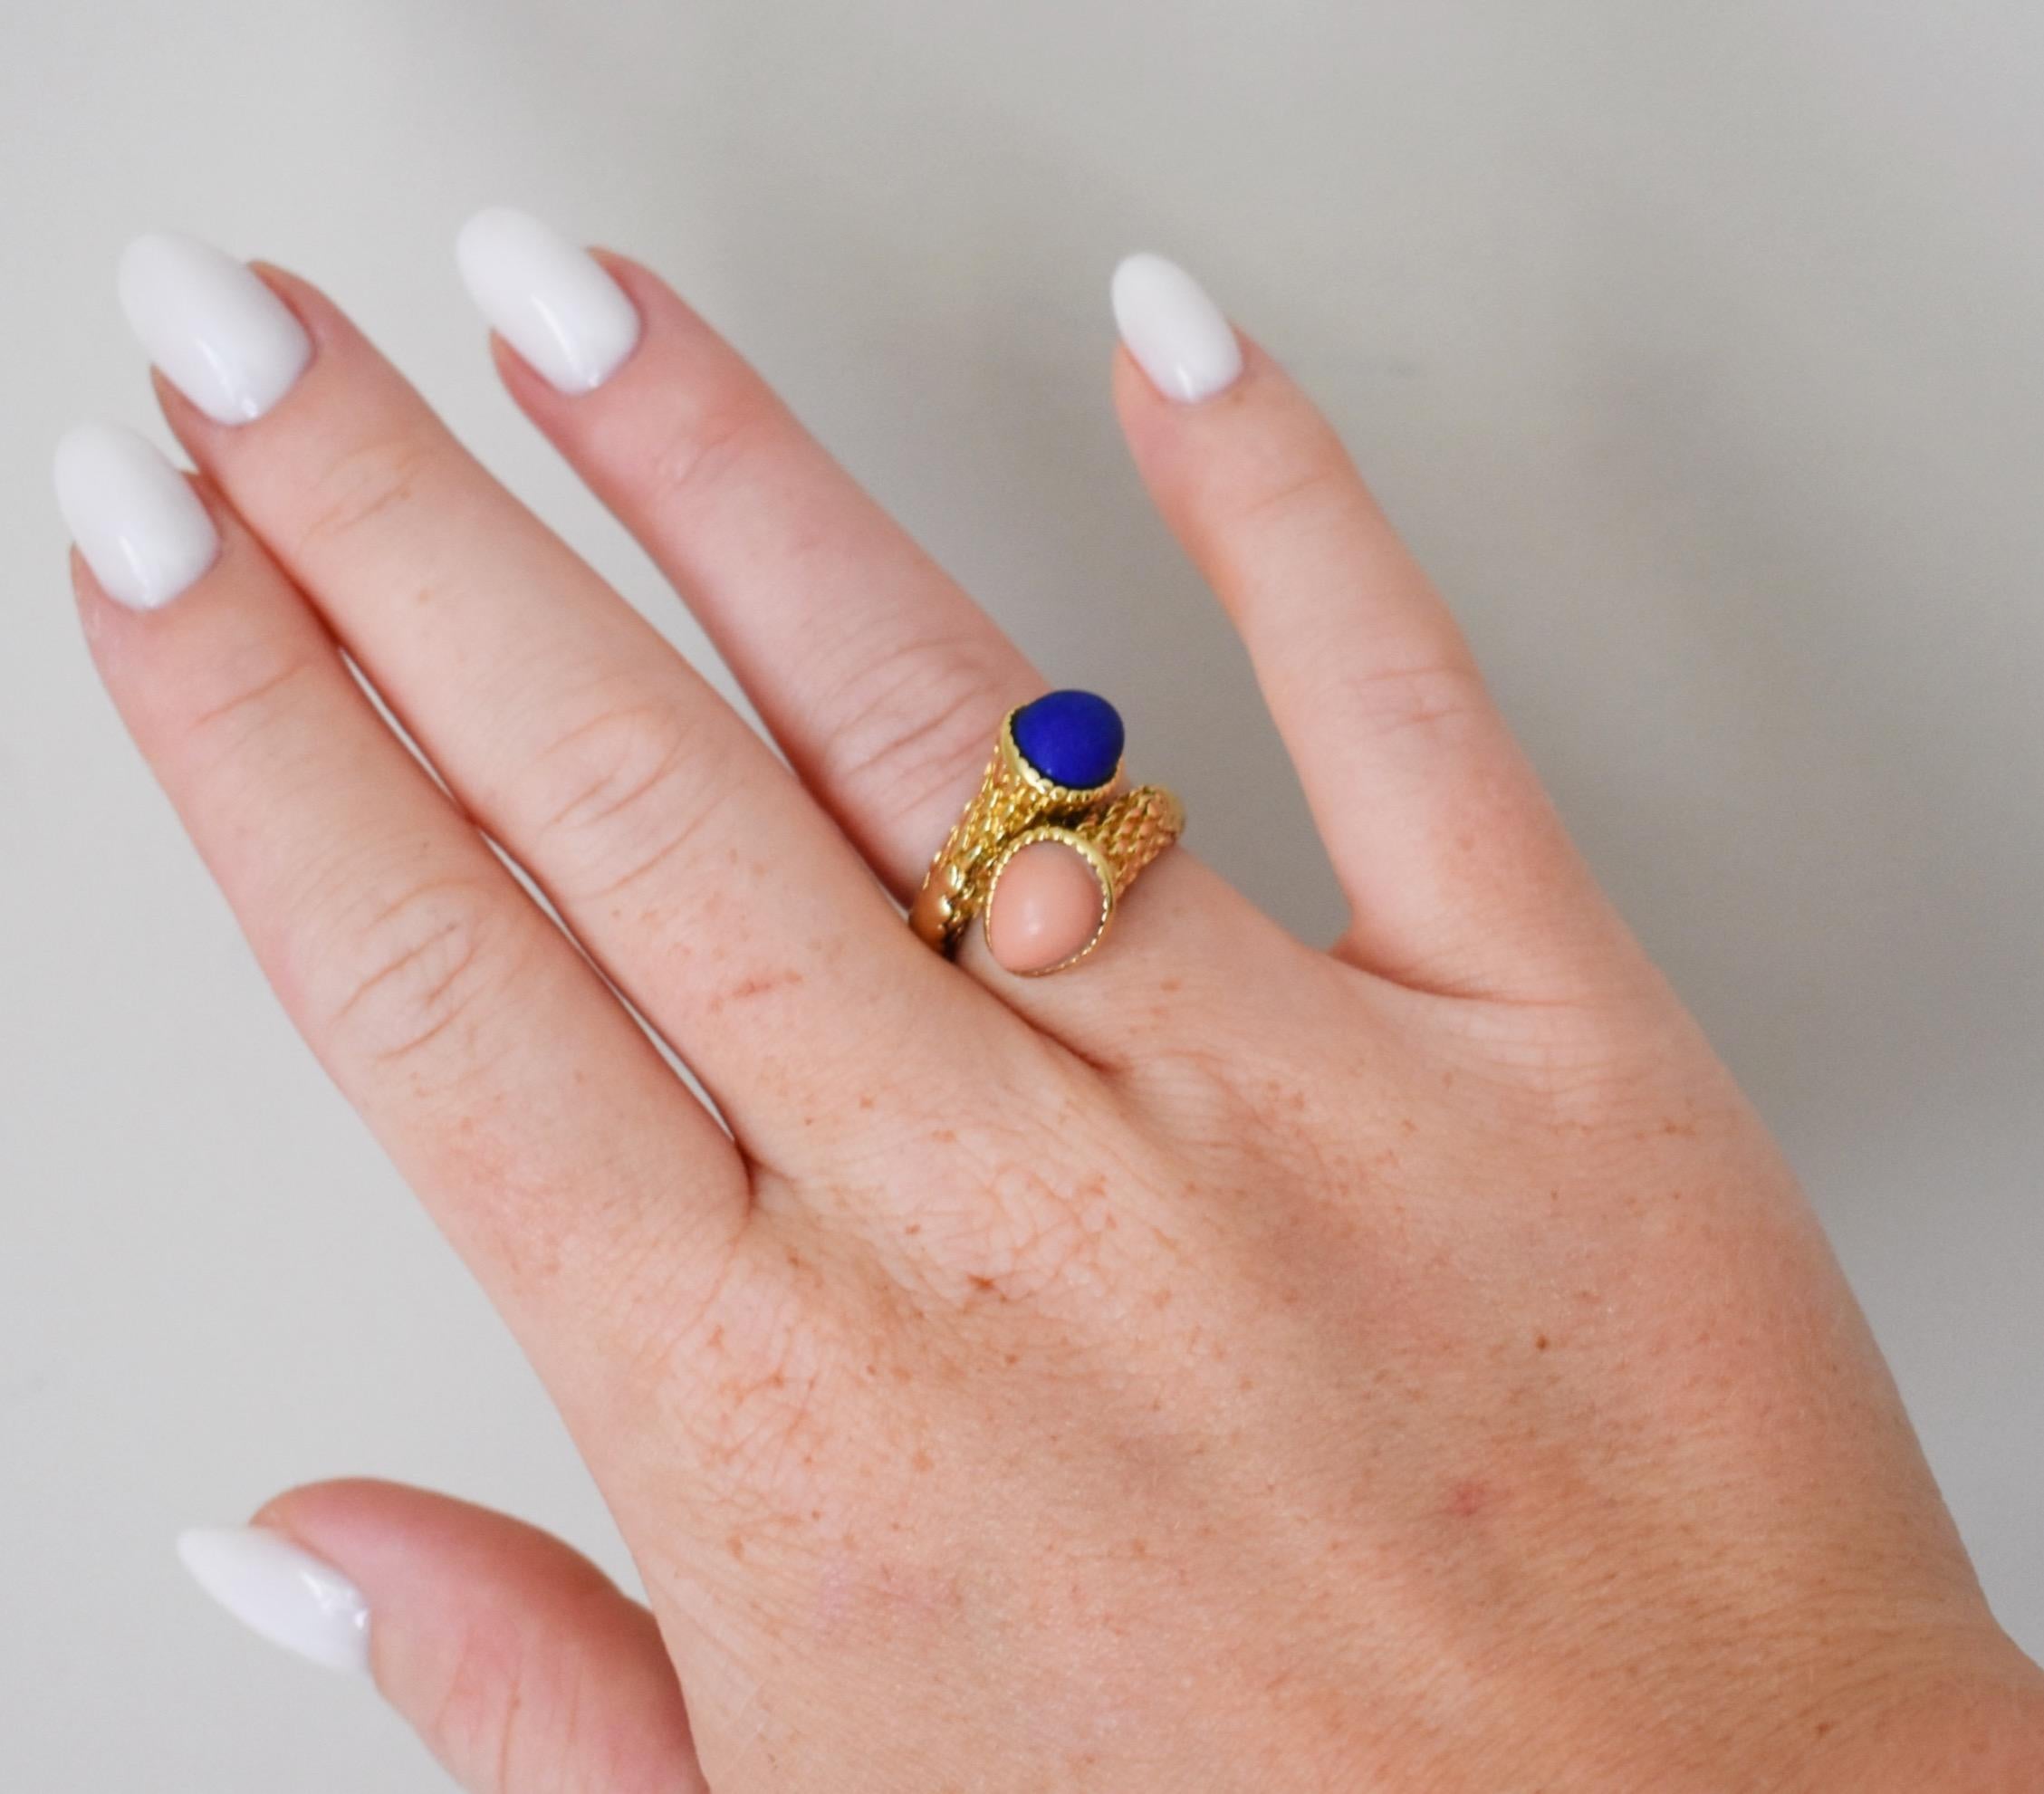 Toi et Moi ring, Serpent Bohème model, attributed to Boucheron. This vintage ring was designed around 1980. It is in 18-carat yellow gold, adorned with two drop cabochons, one in angel-skin coral and the other in lapis lazuli.

The Serpent Bohème